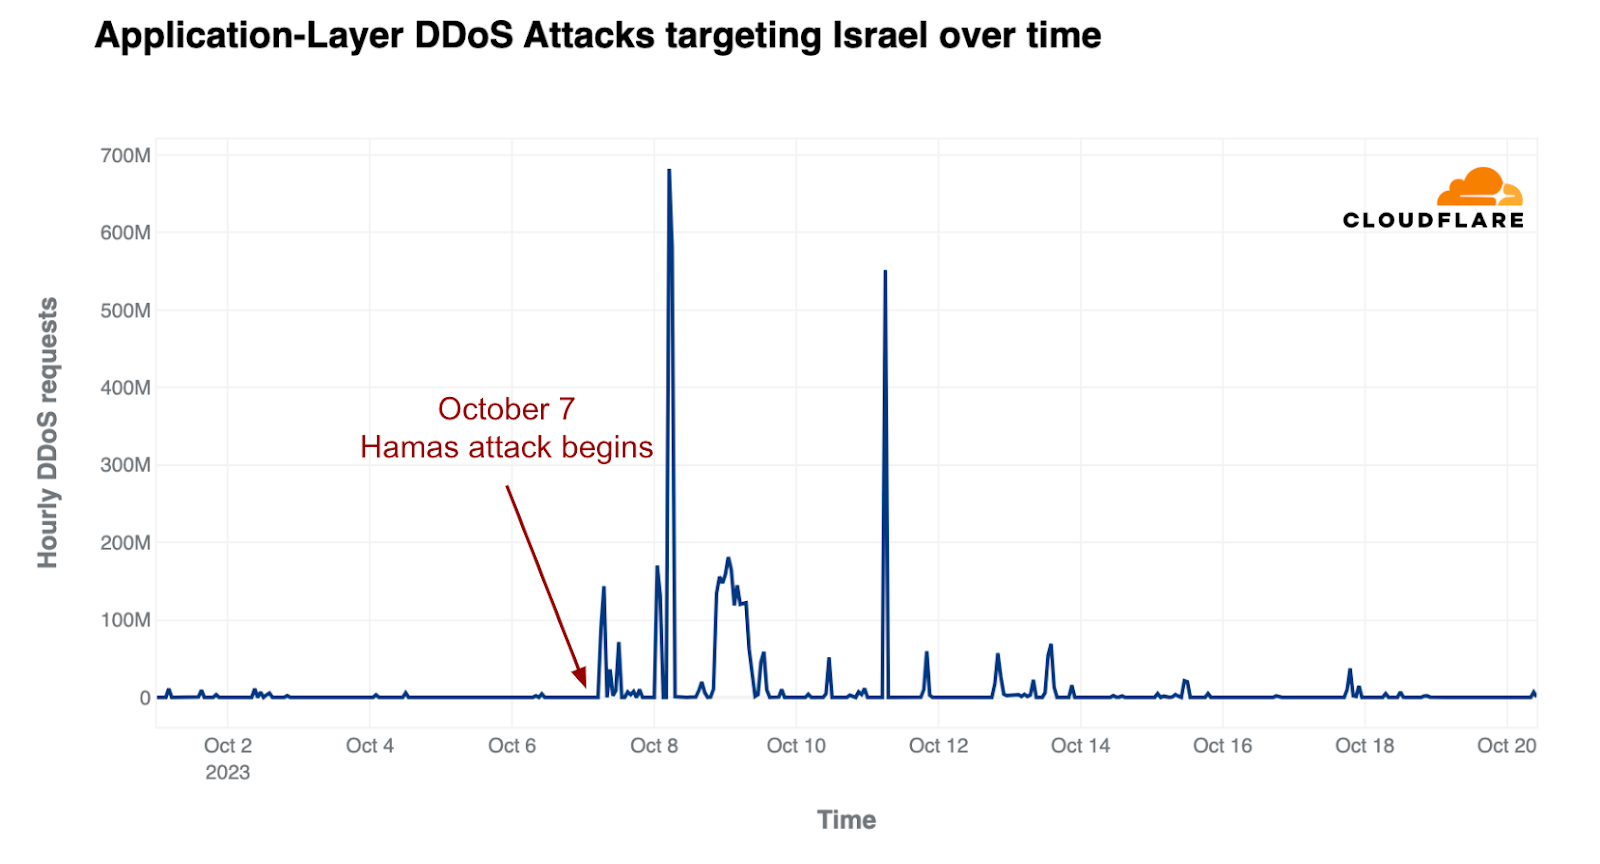 Cloudflare Observed The Peak DDOS Attack of 201 Million HTTP Requests Per Second 